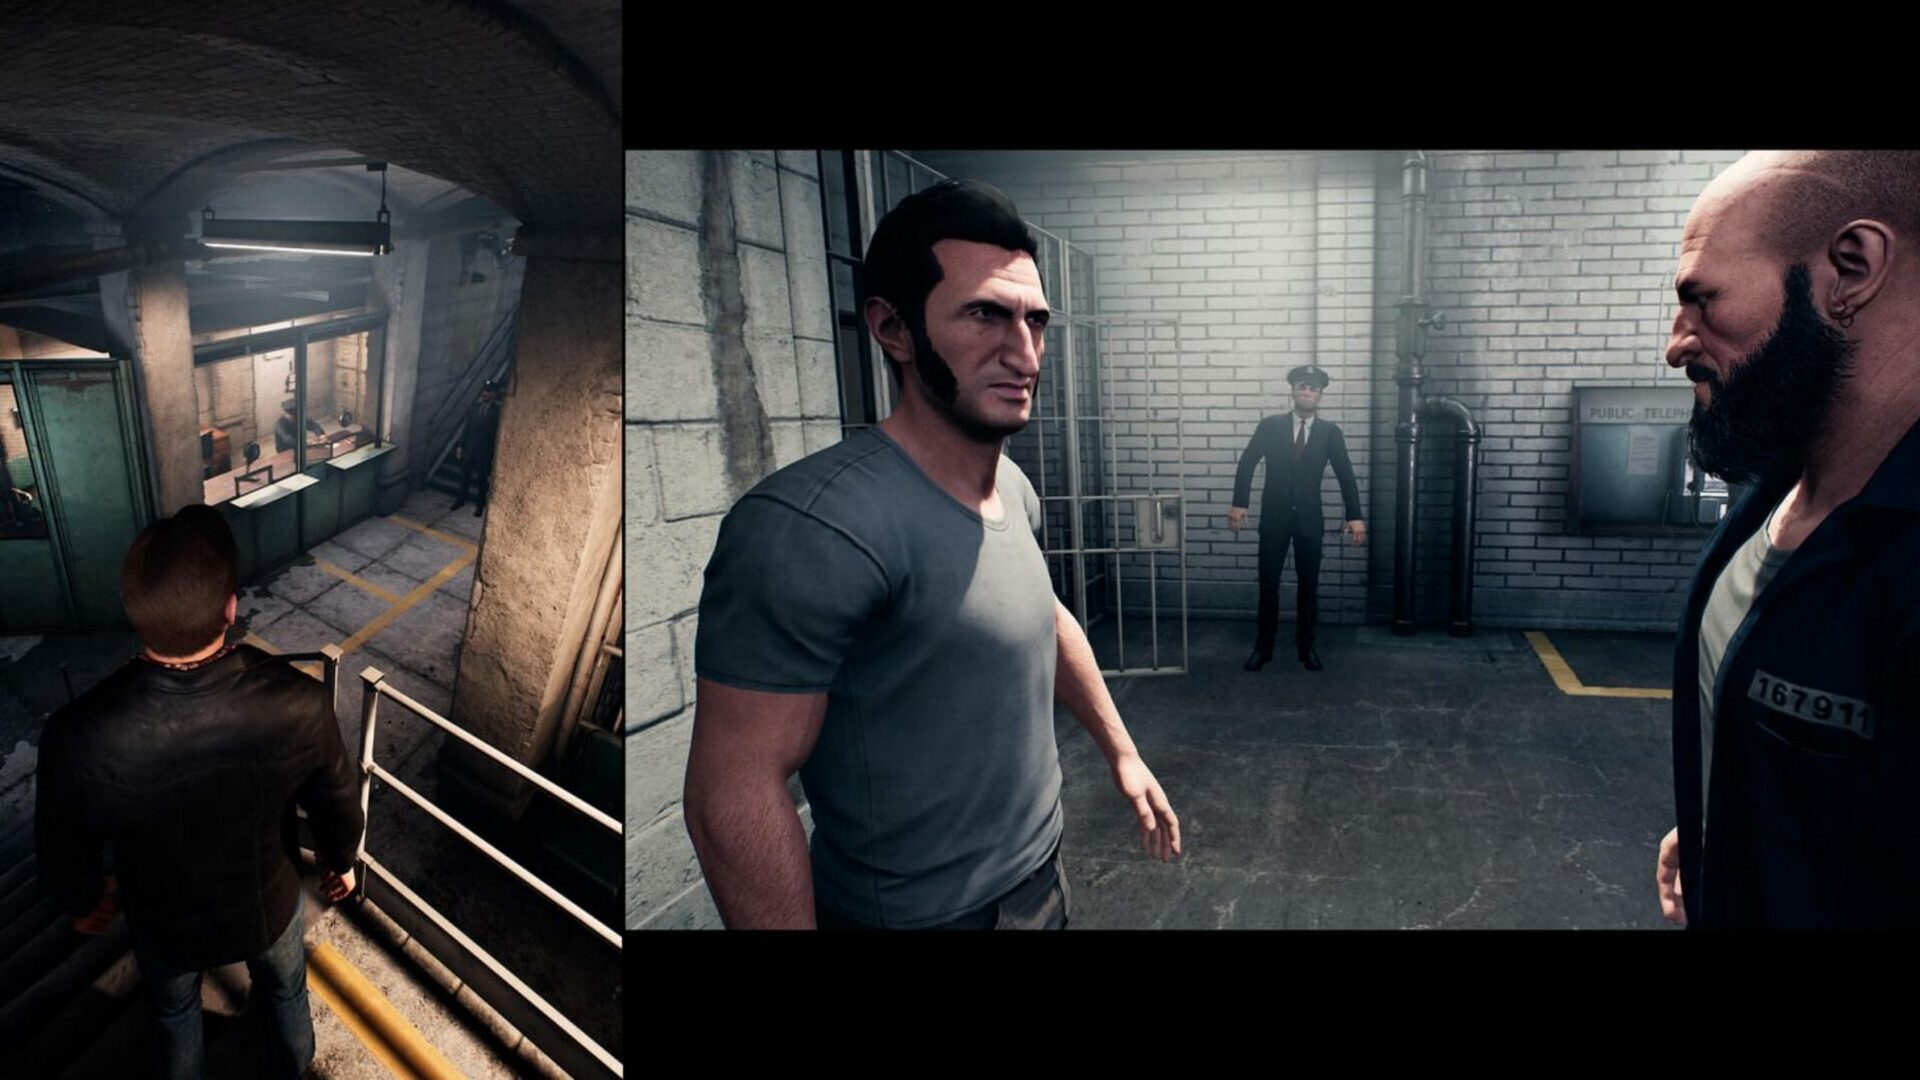 Игра цифровой побег. Way out игра. Игра a way out ps4. A way out на ПС. A way out (ПК, ps4, Xbox one).